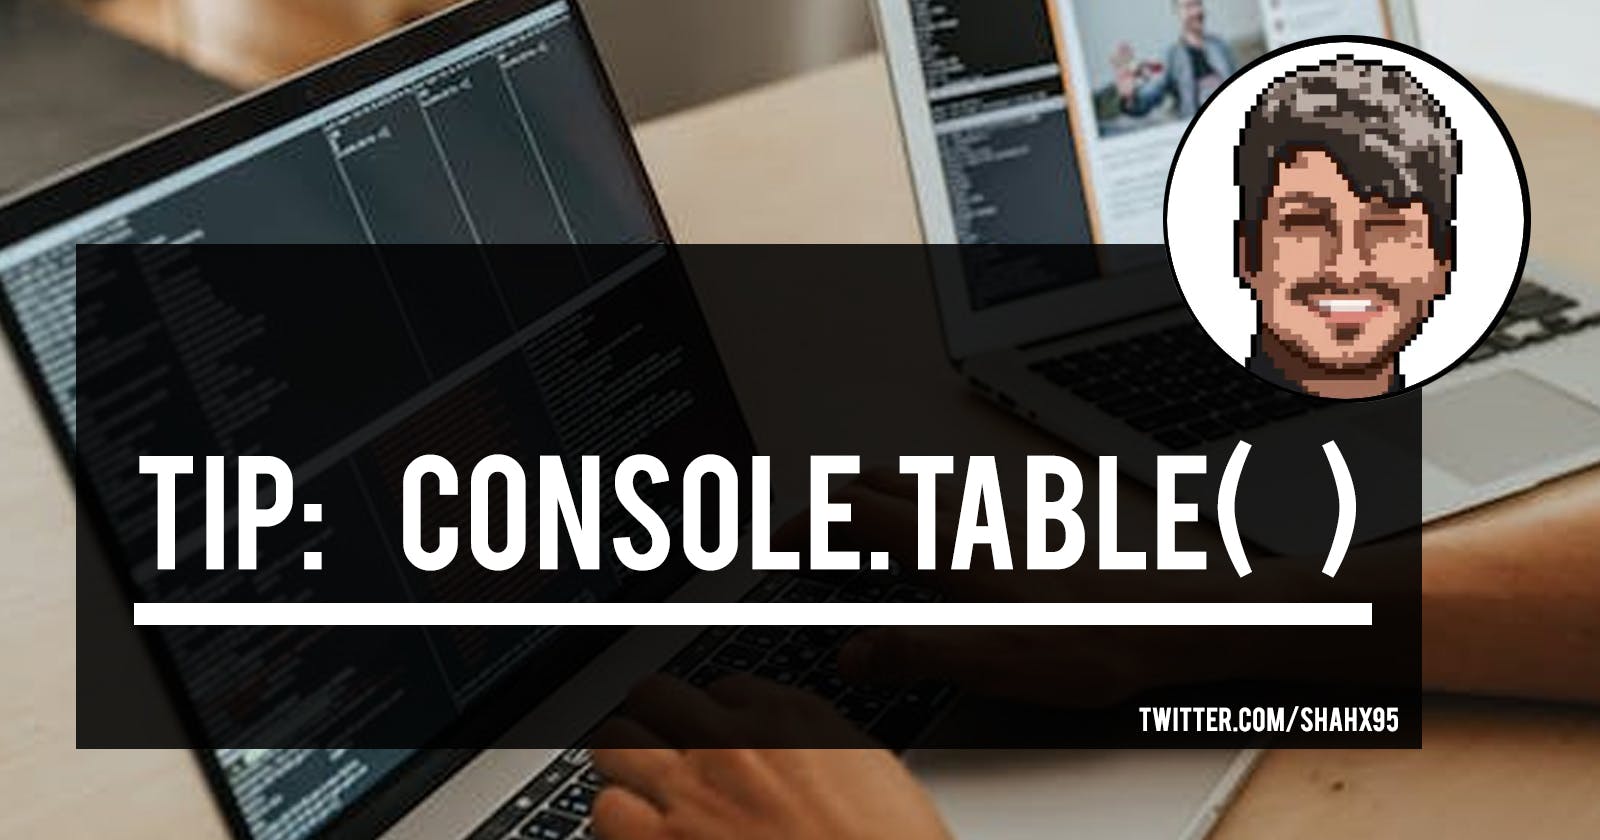 Tip: console.table()